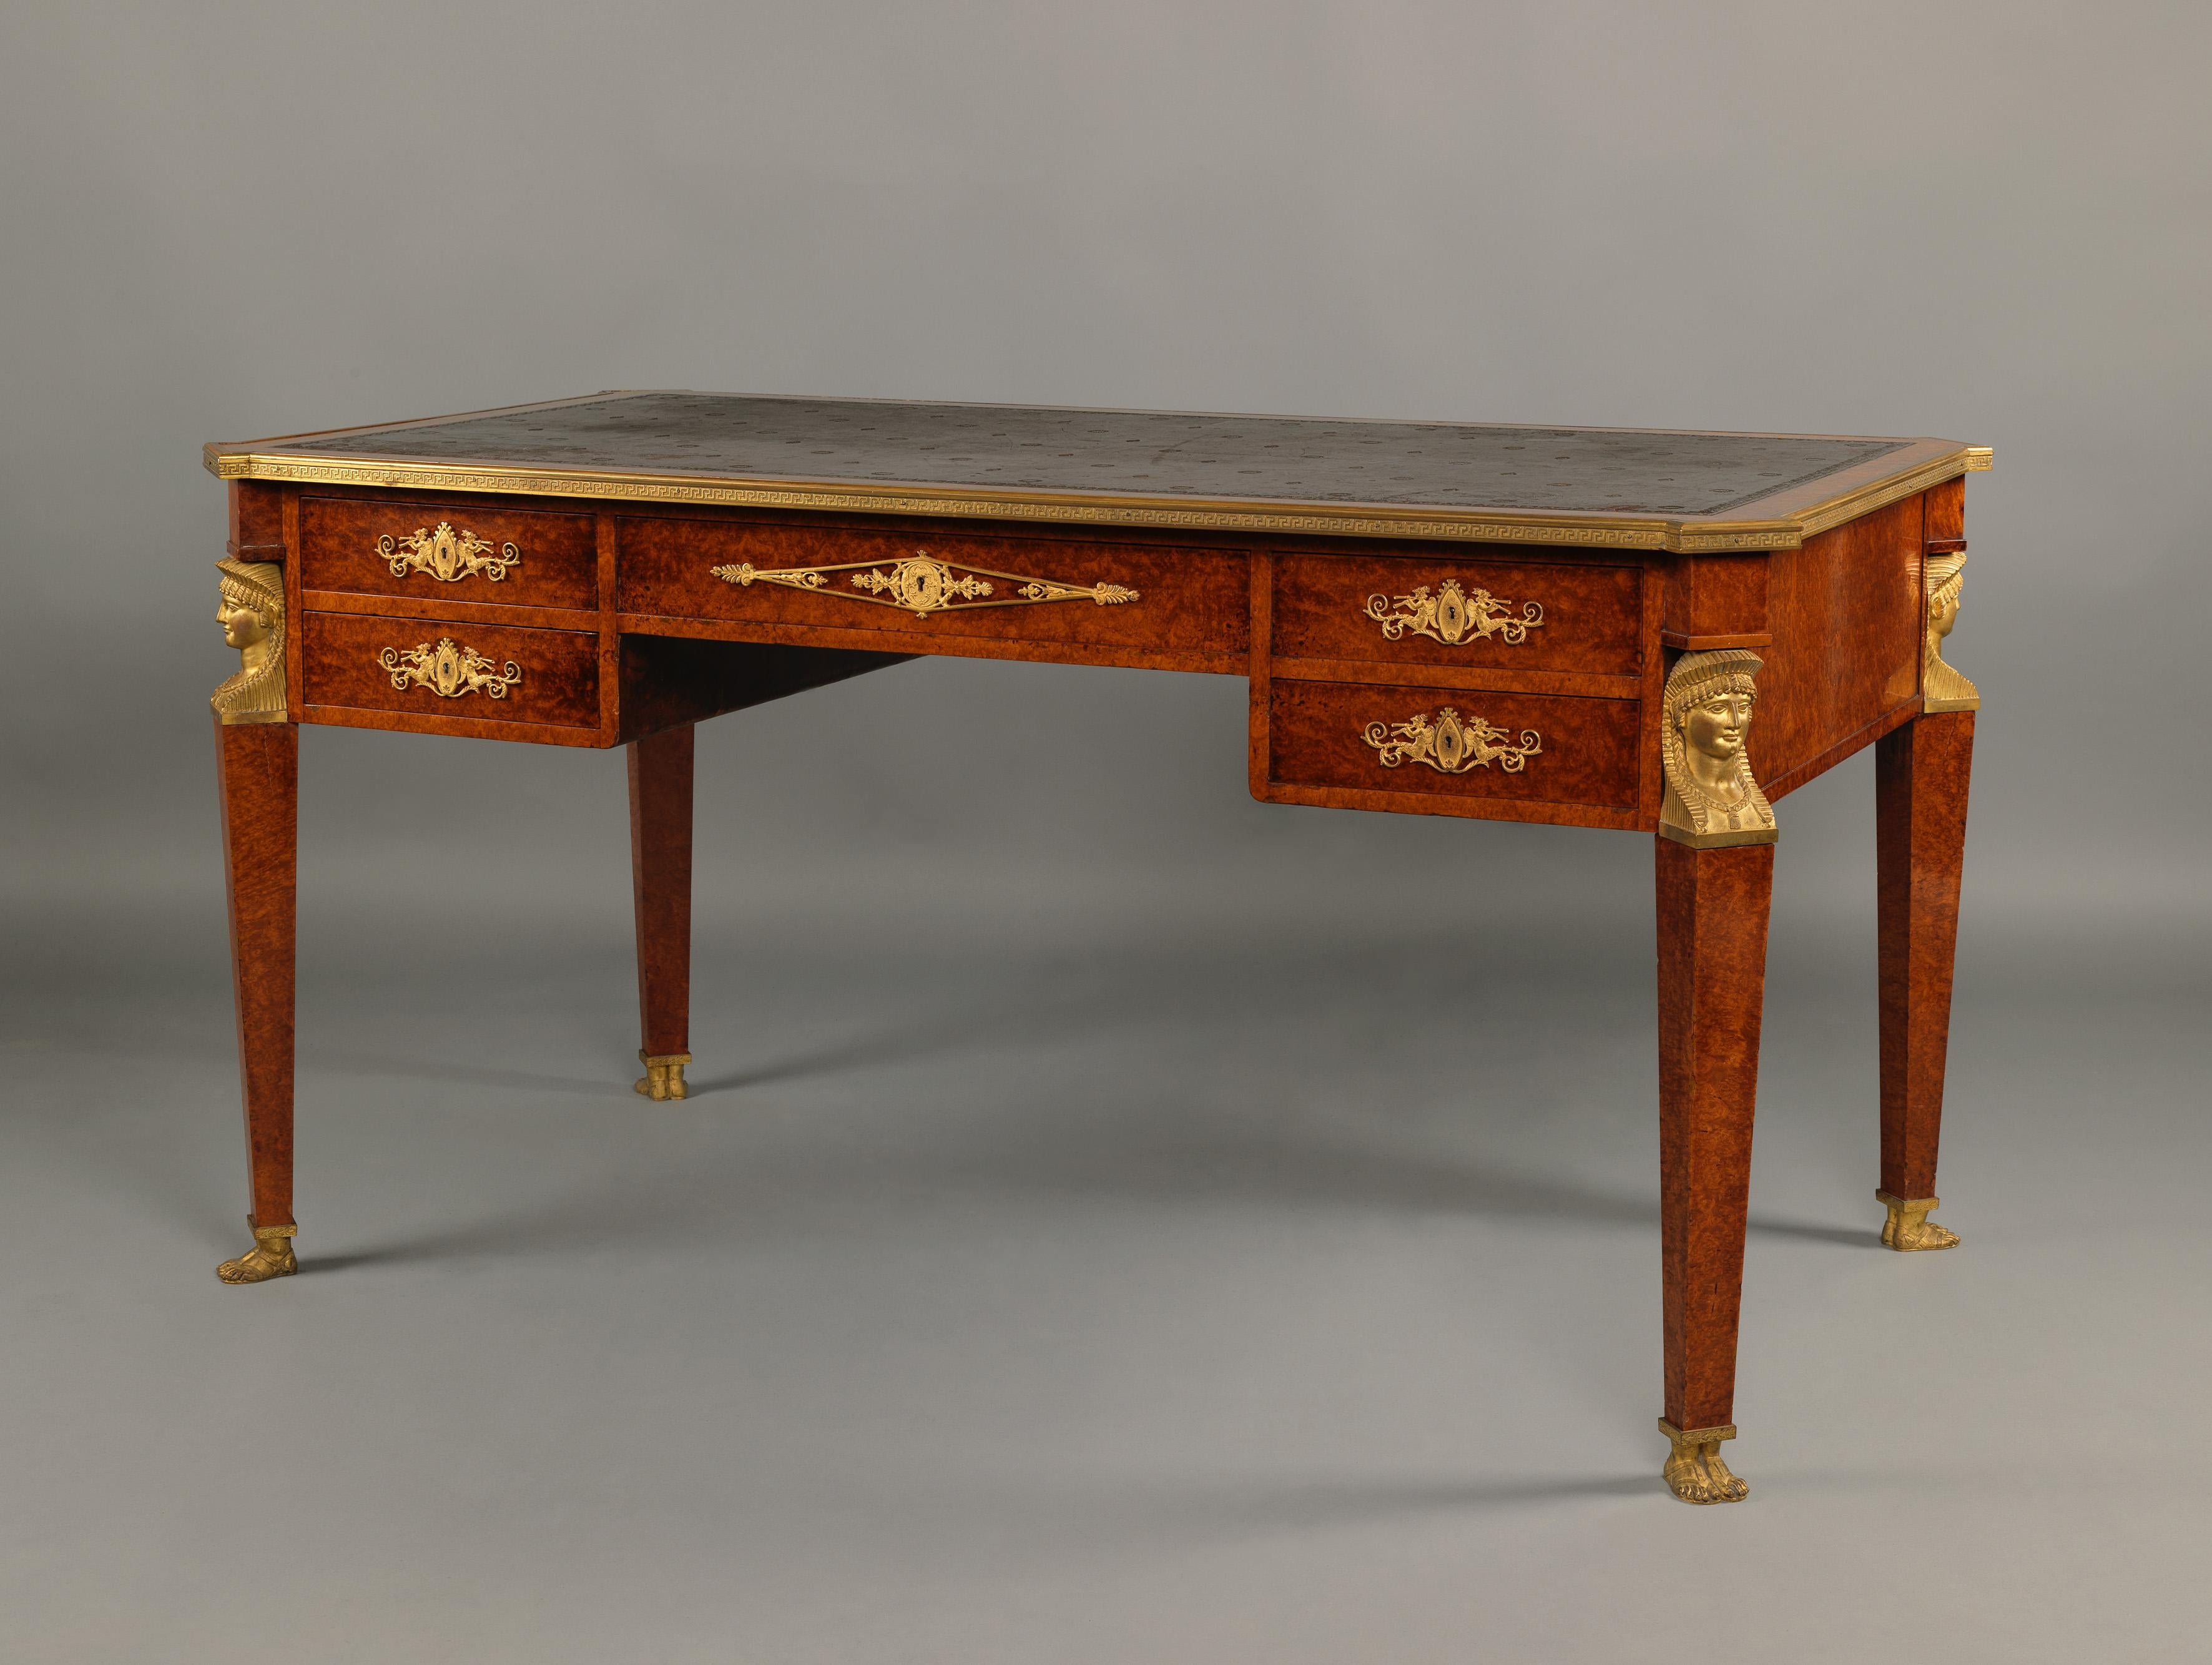 An Empire style gilt-bronze mounted bureau plat by Maison Forest.

Paris, circa 1900.

Bearing two labels to the underside: 'FOREST/TAPISSERIE/EBENISTERIE/31 RUE CAMBACERES.PARIS'.

This fine burr amboyna veneered bureau plat has a gilt-tooled